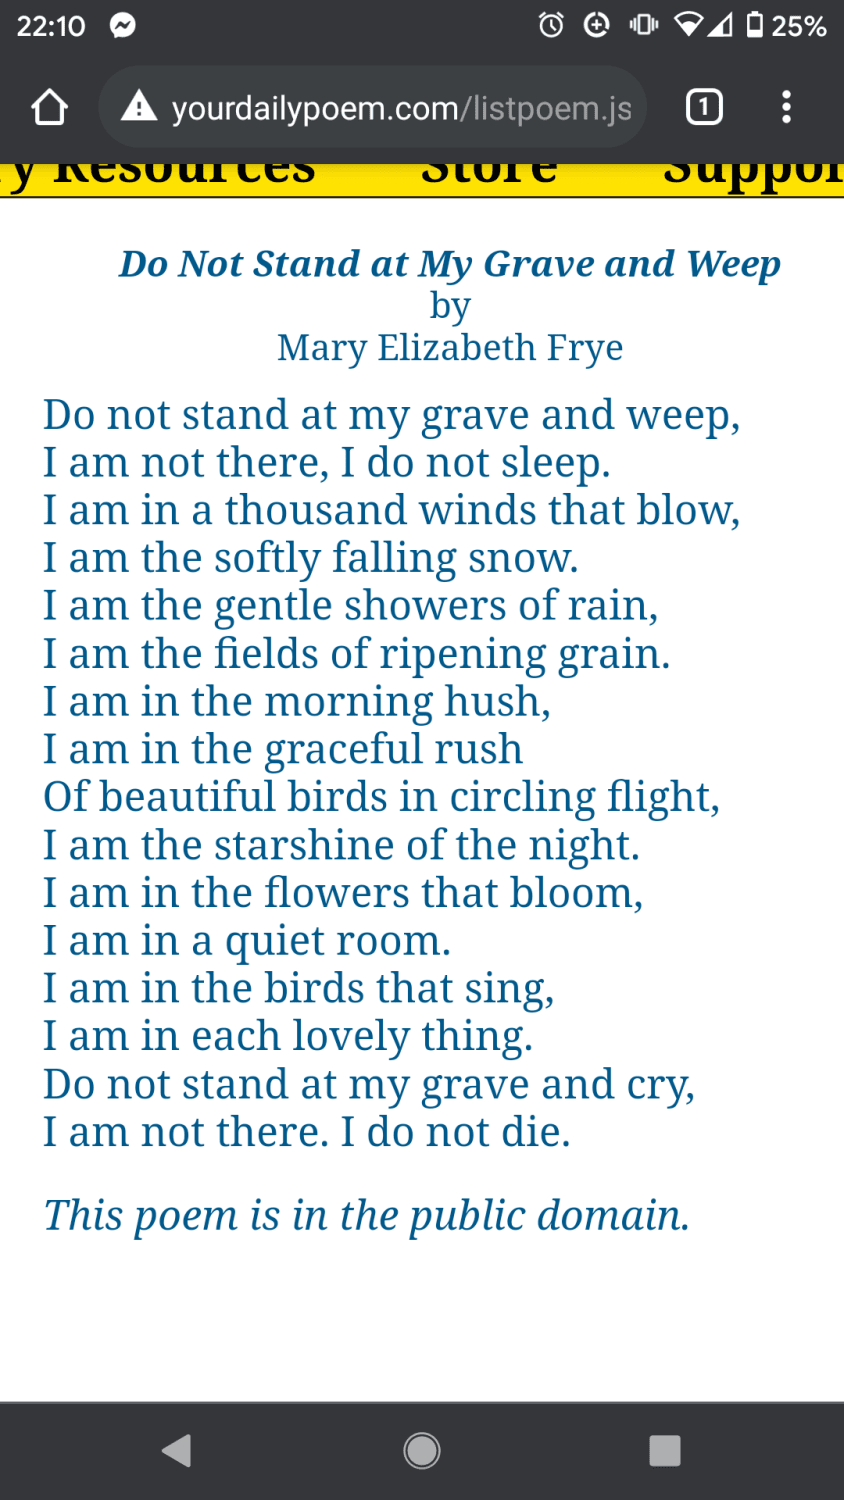 My favorite poem, I think you witches can appreciate it. "Do not stand at my grave and weep" by Mary Elizabeth Frye